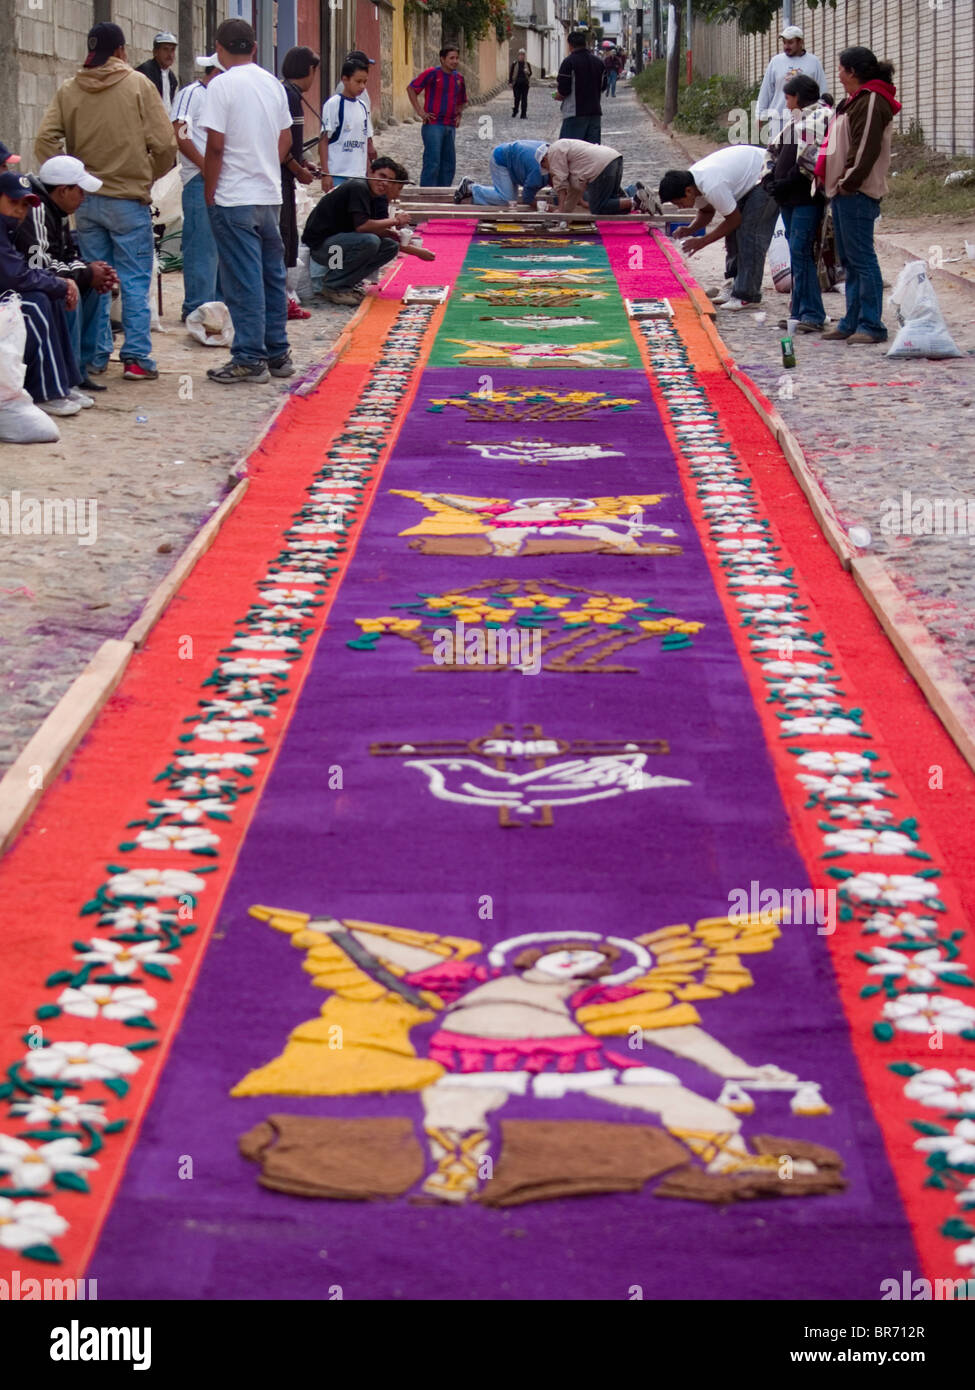 As part of the observance of Lent in Guatemala a group of people prepares an aromatic carpet for a procession in Antigua Guate Stock Photo